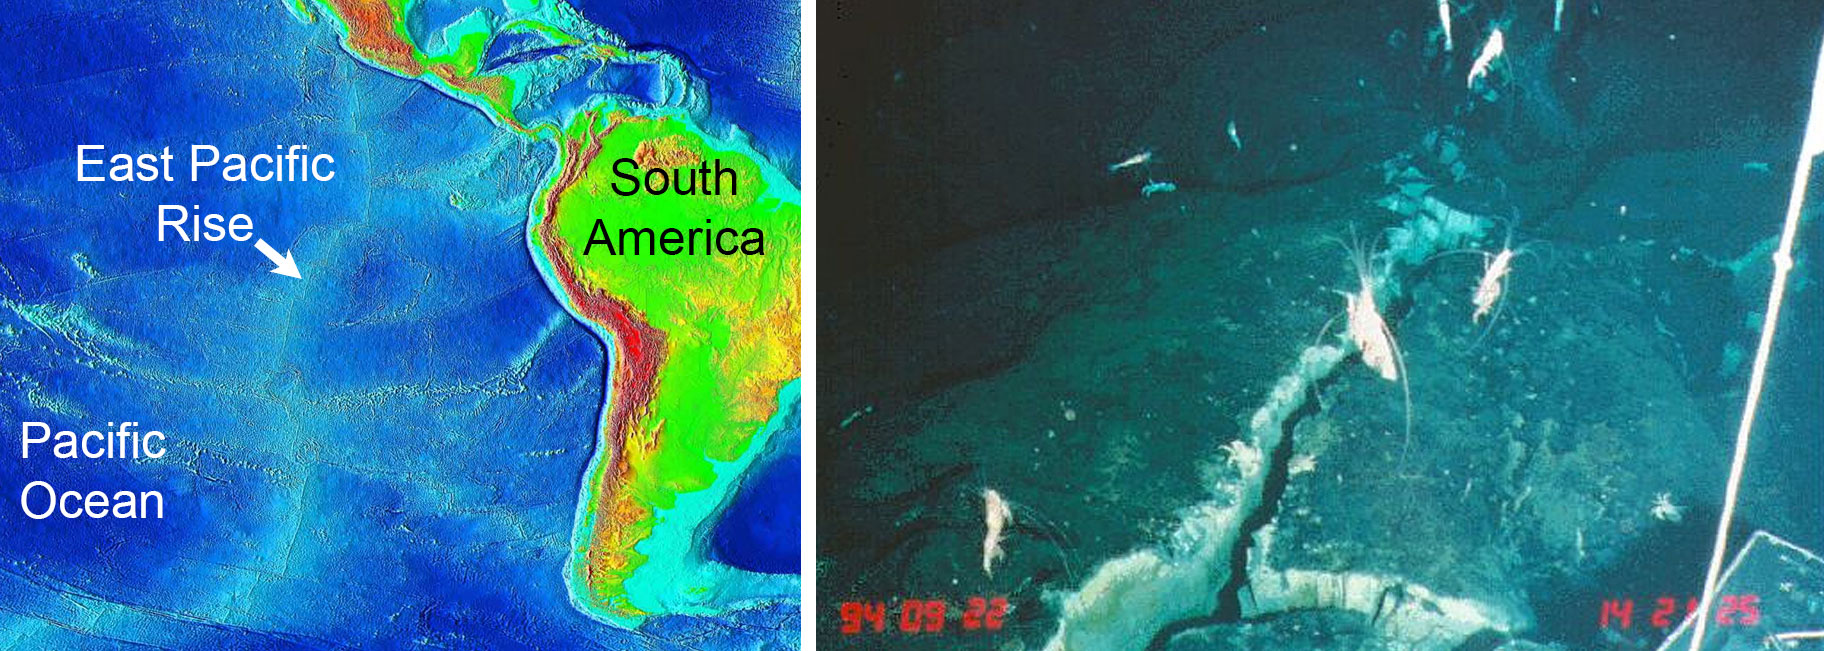 2-panel image. Panel 1: Map of South America and the eastern Pacific showing the location of the East Pacific Rise west of South America. Panel 2: Photo taken underwater on the East Pacific Rise showing a fissure running through basalt and shrimp swimming around.